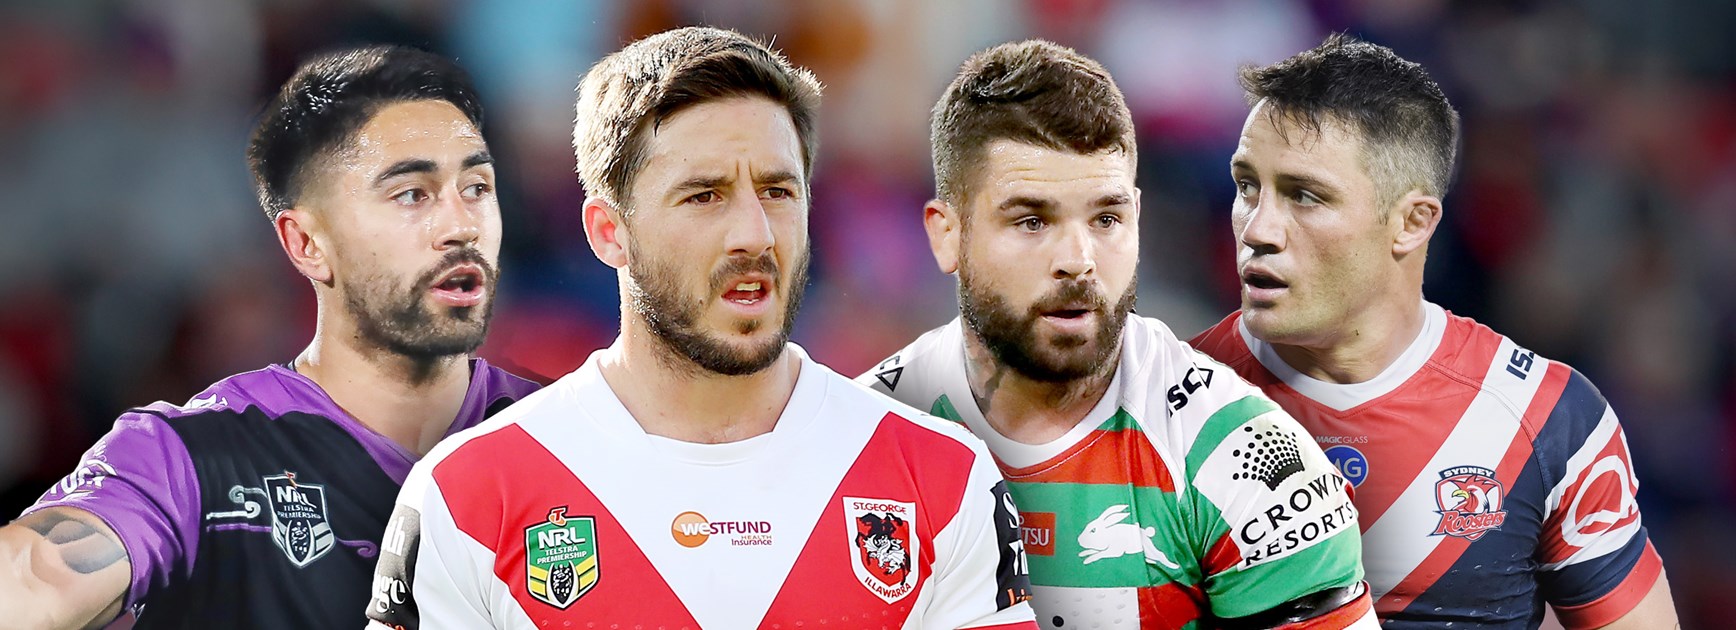 Million-dollar question looms for finals halfbacks